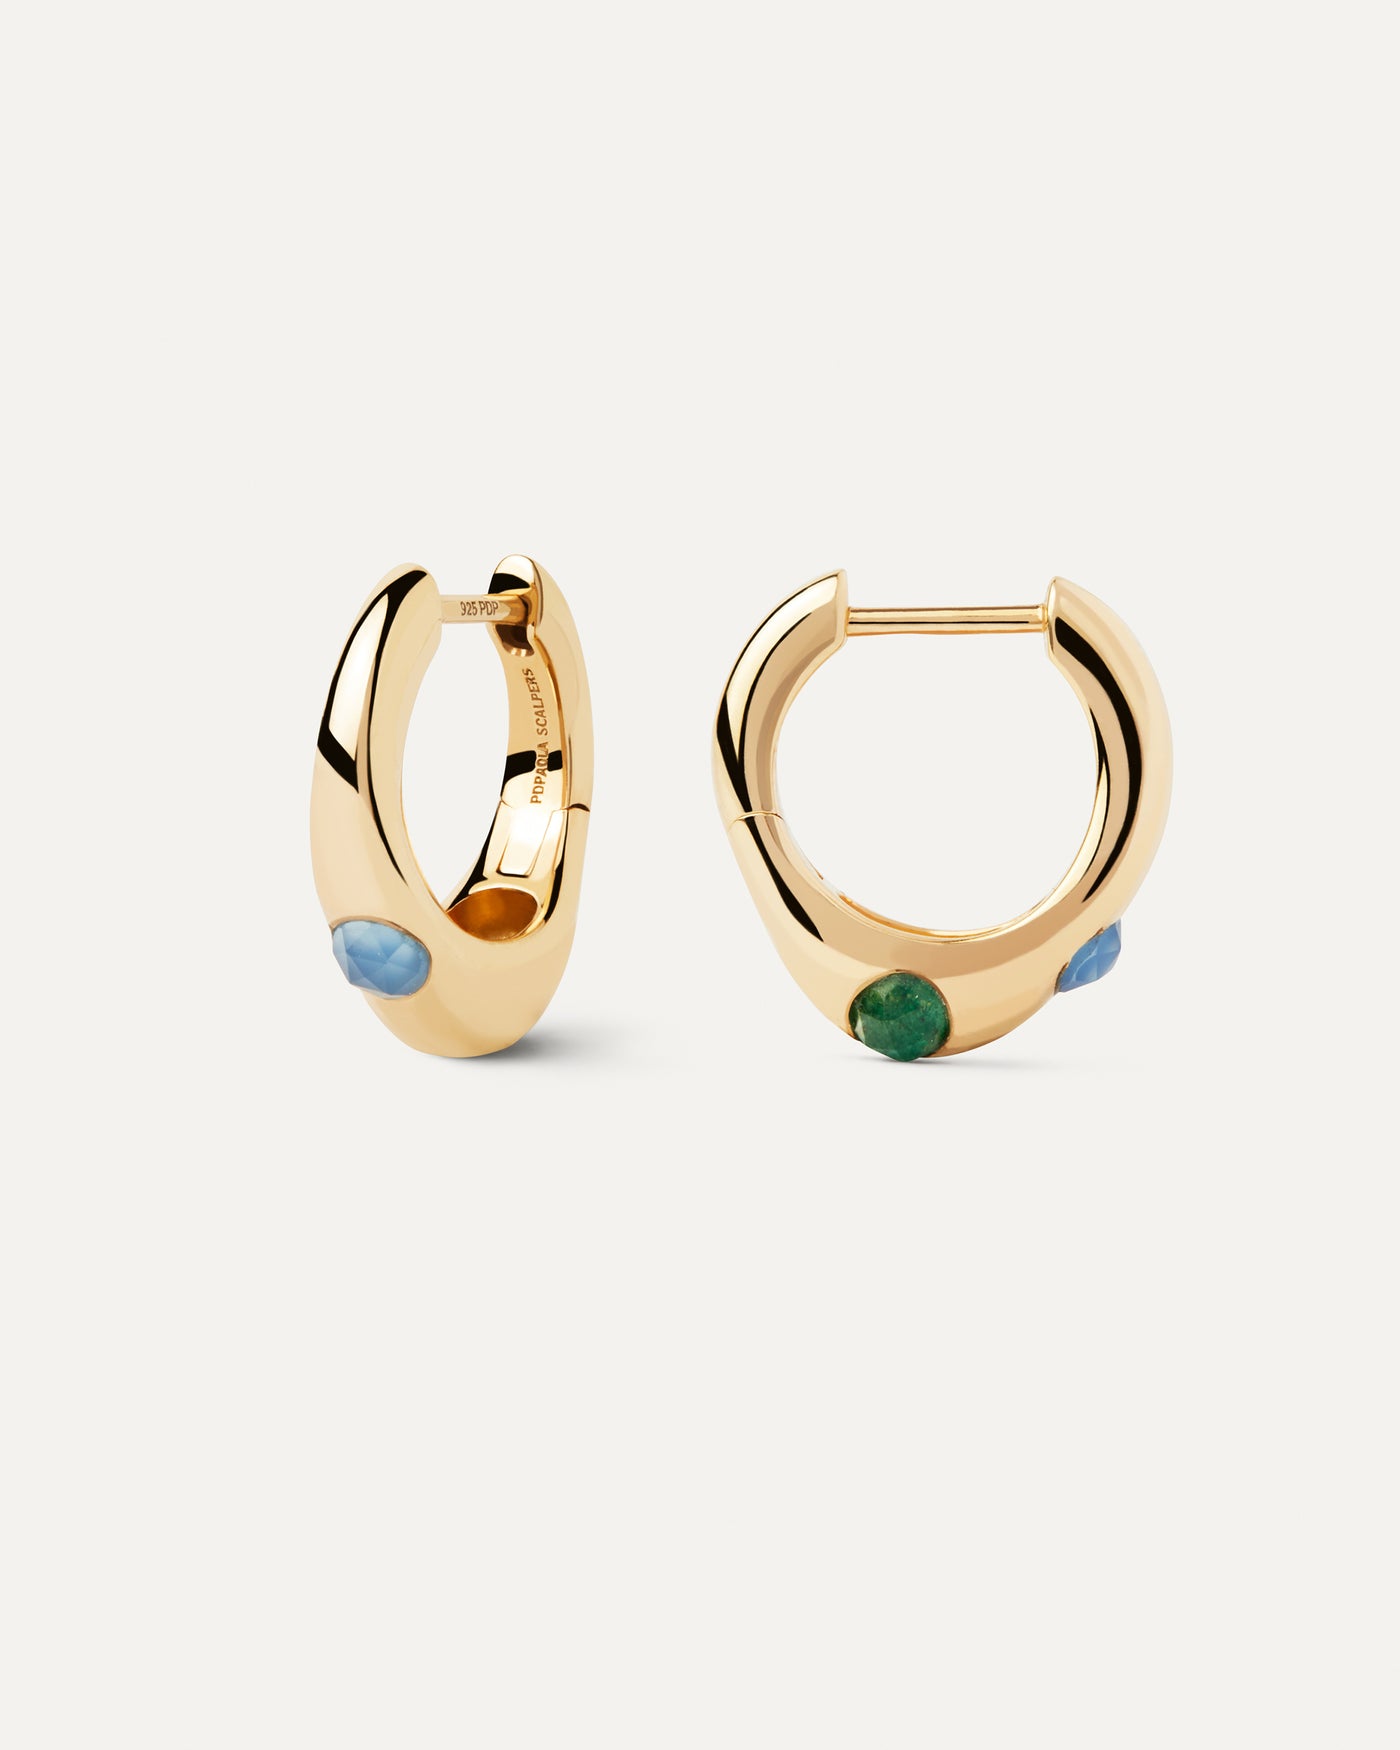 2023 Selection | Coral Hoops. Gold-plated organic shape huggies embellished with green aventurine and chalcedony . Get the latest arrival from PDPAOLA. Place your order safely and get this Best Seller. Free Shipping.